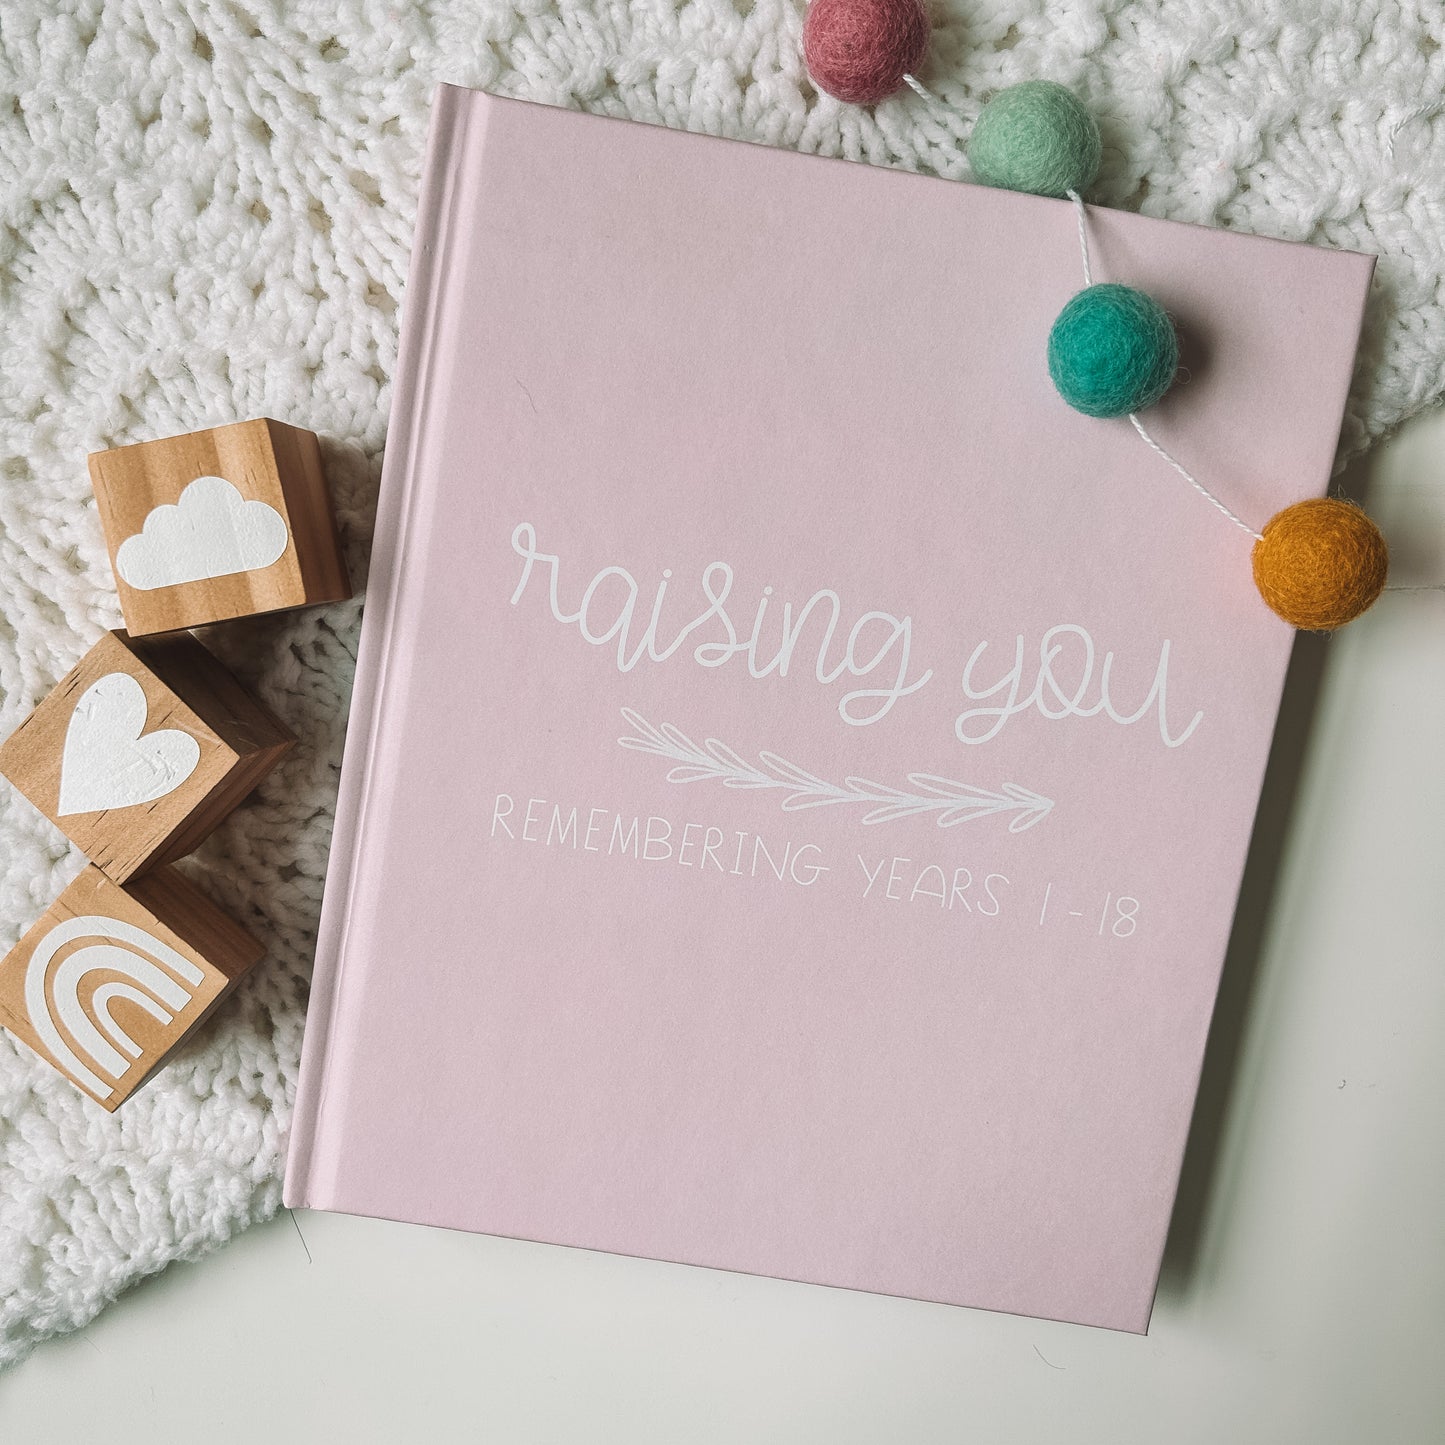 Pink childhood memory book titled Raising You Remembering Years 1-18 in white text